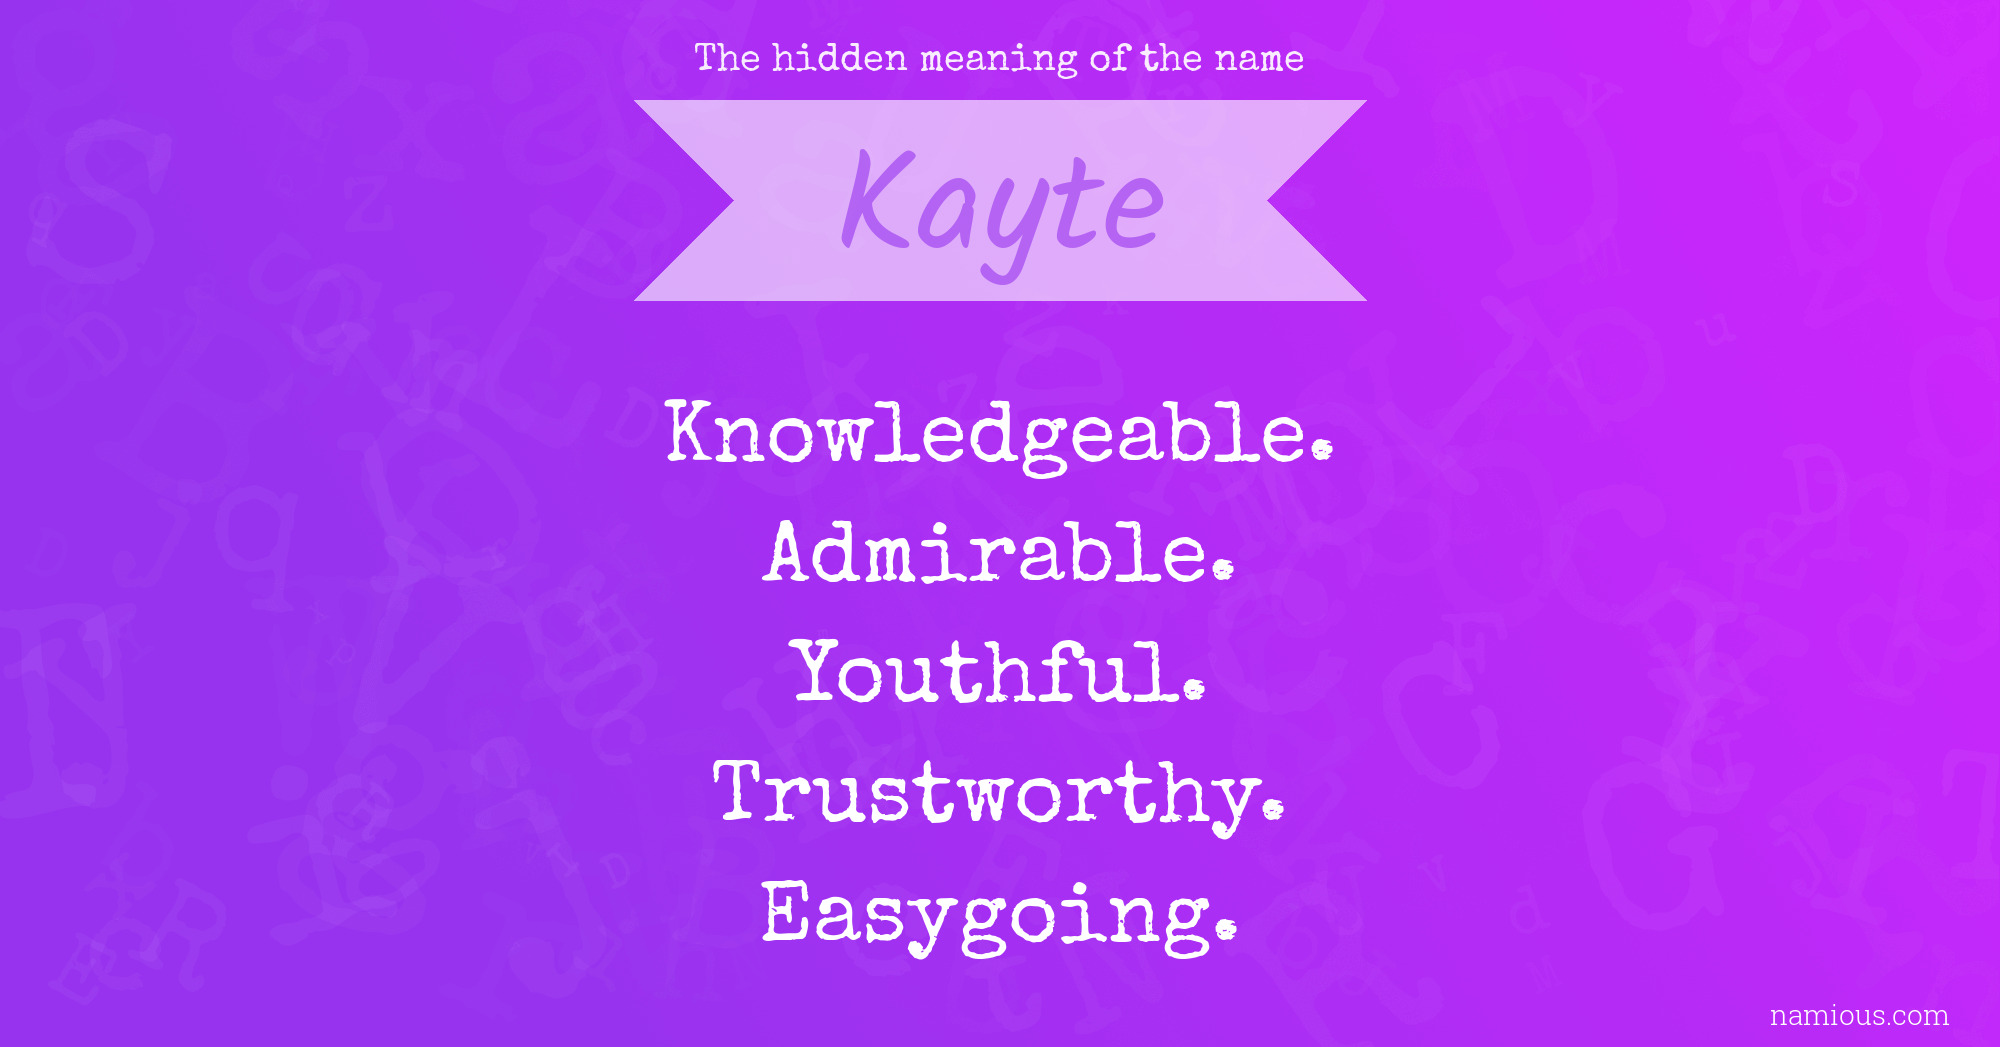 The hidden meaning of the name Kayte